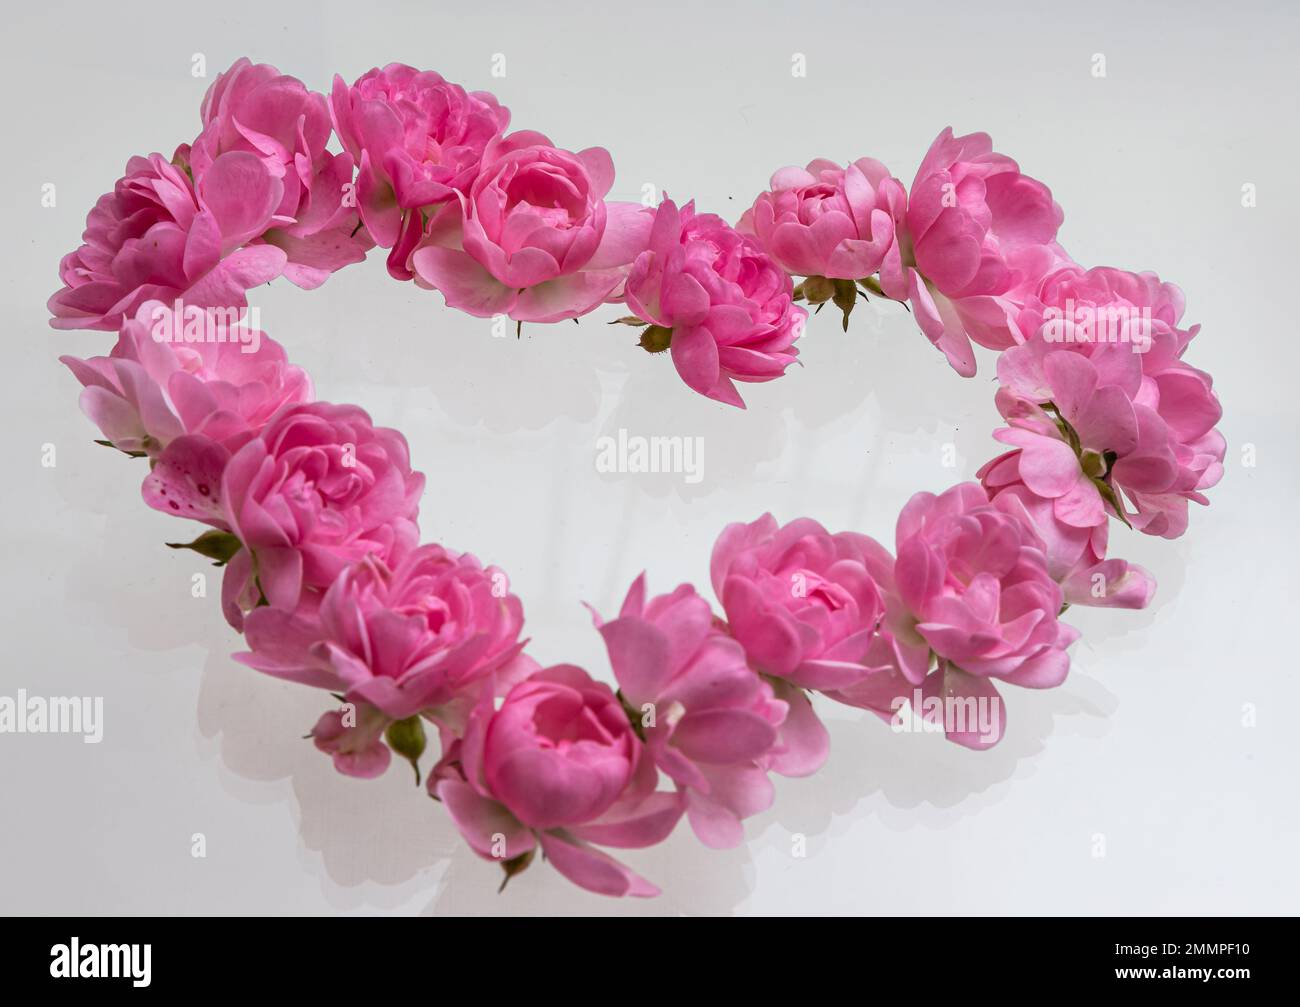 Pink roses Heart shape.on white background.Rose is a flower symbol represents love, romance in Valentines Day. Stock Photo